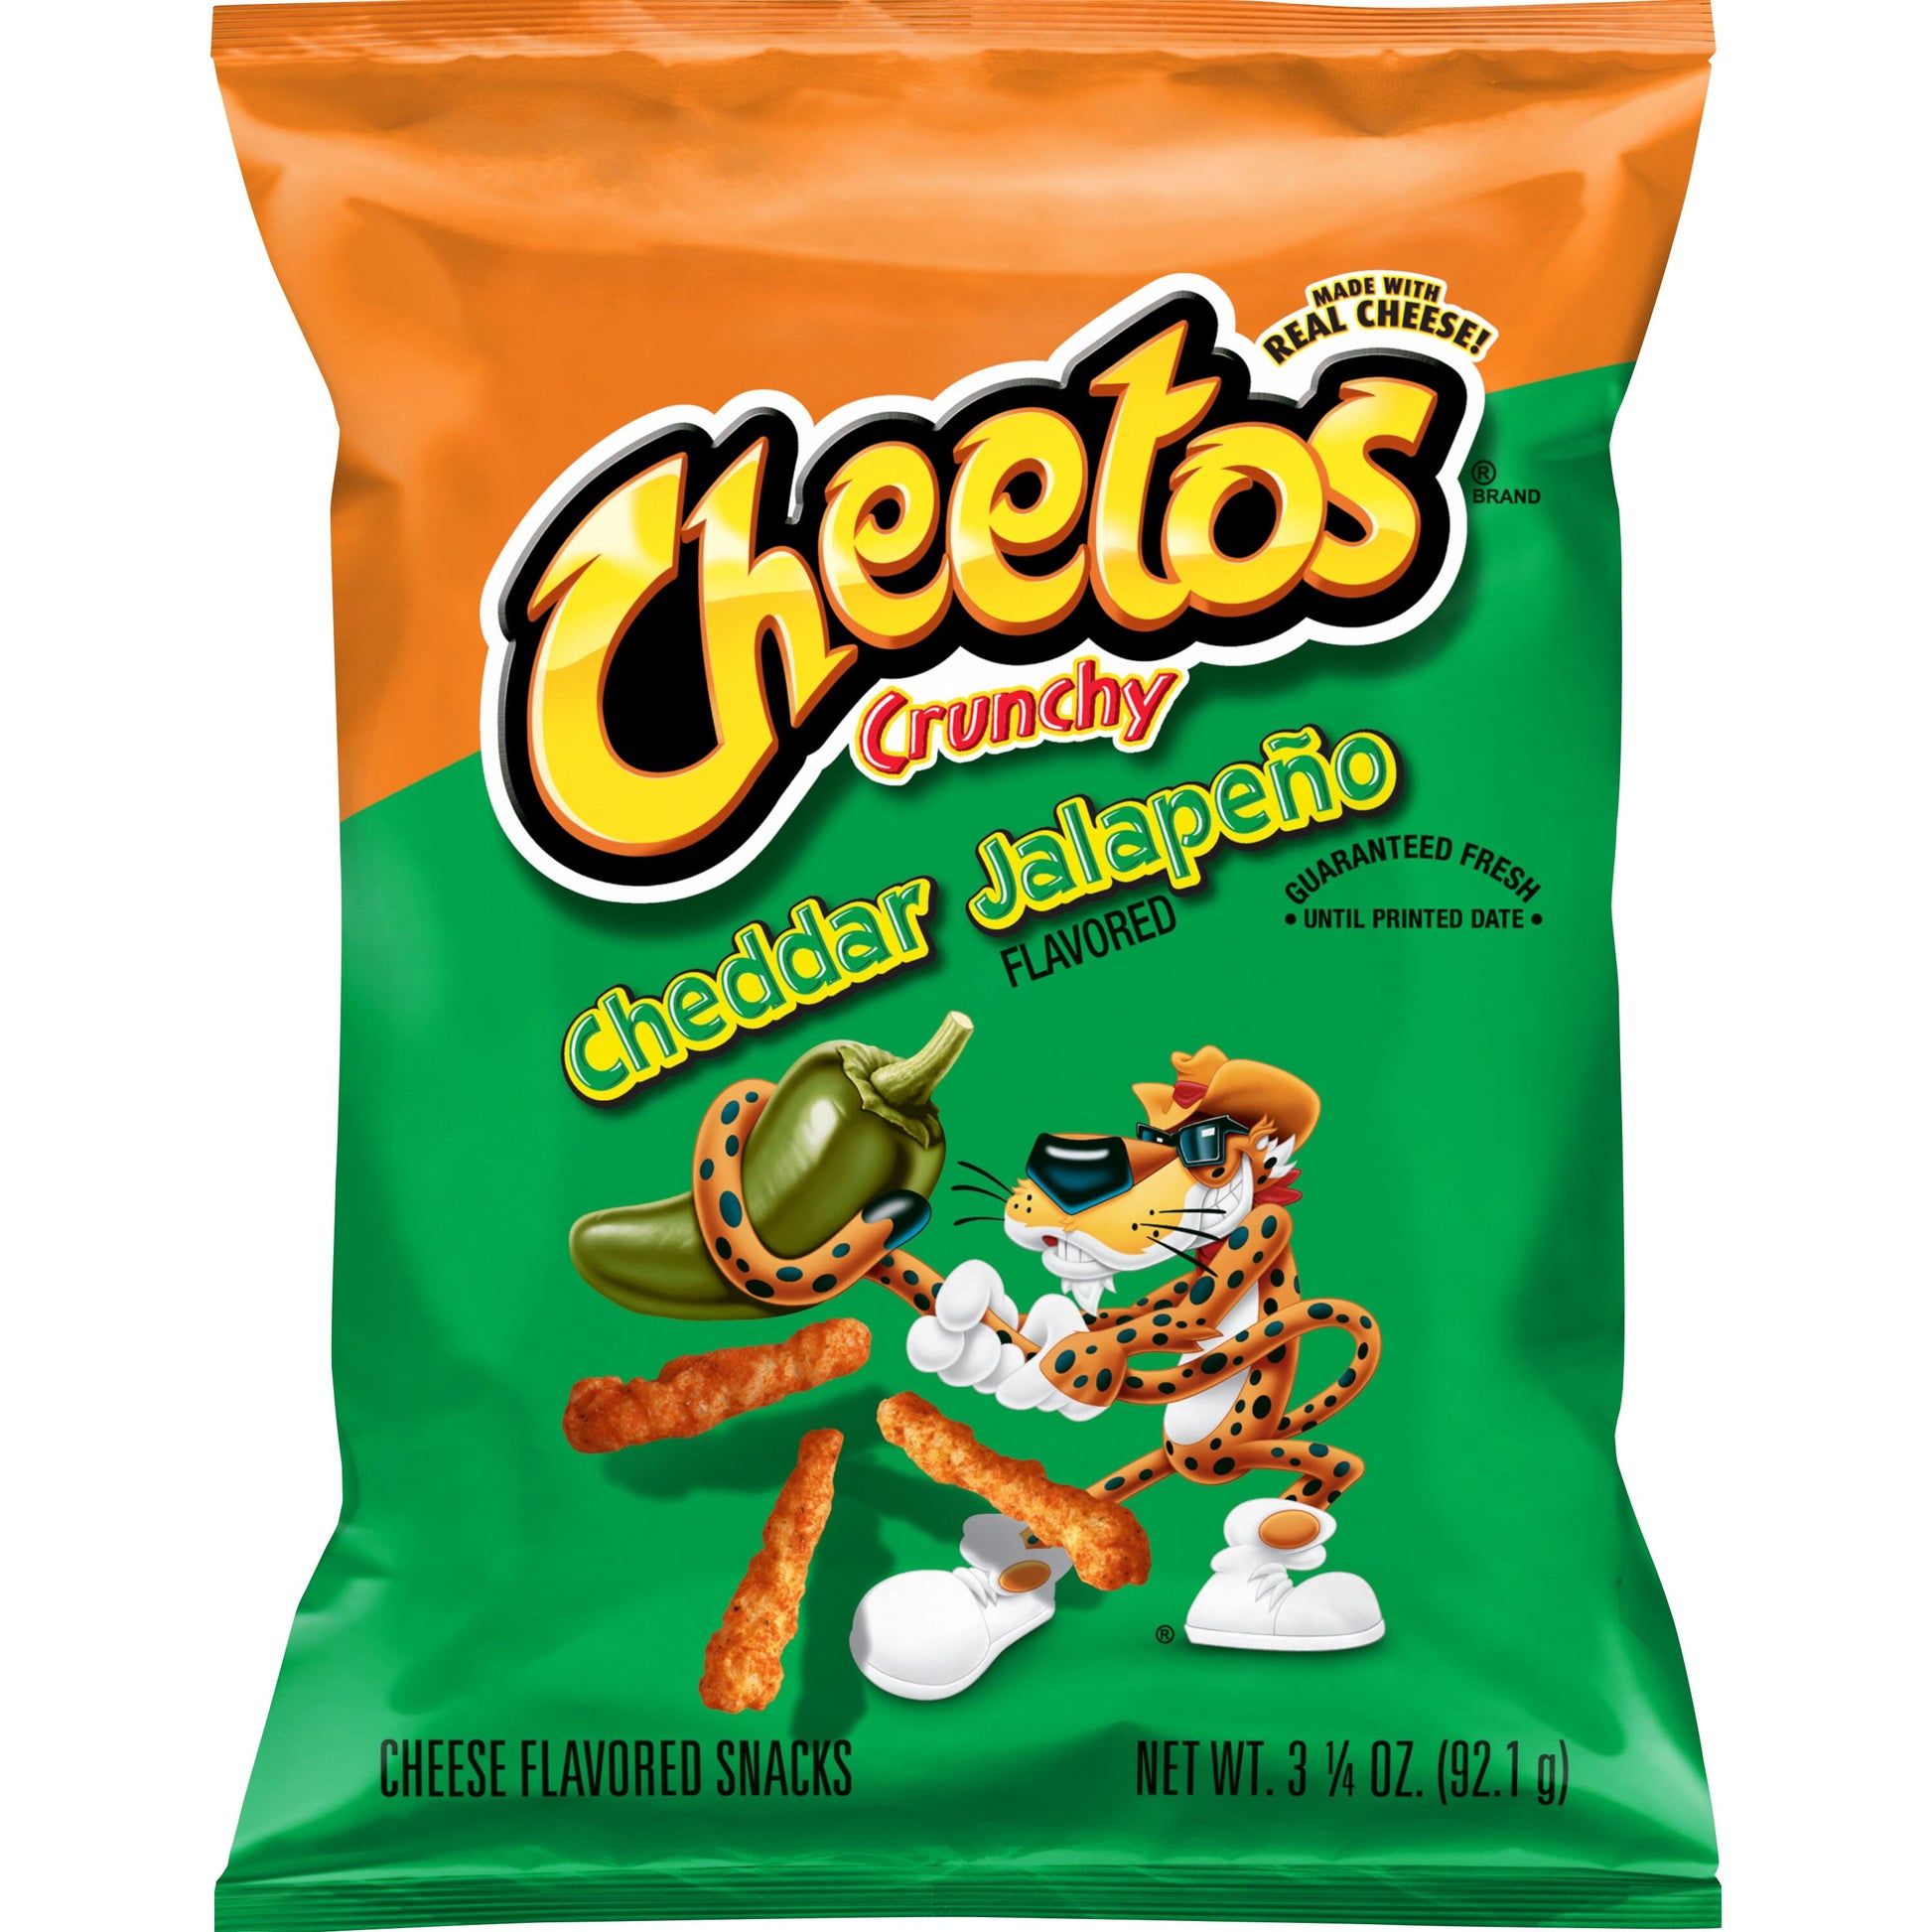 Crunchy Cheese Cheddar Jalapeno Flavored Snack Chips, 3.25 Oz Bag